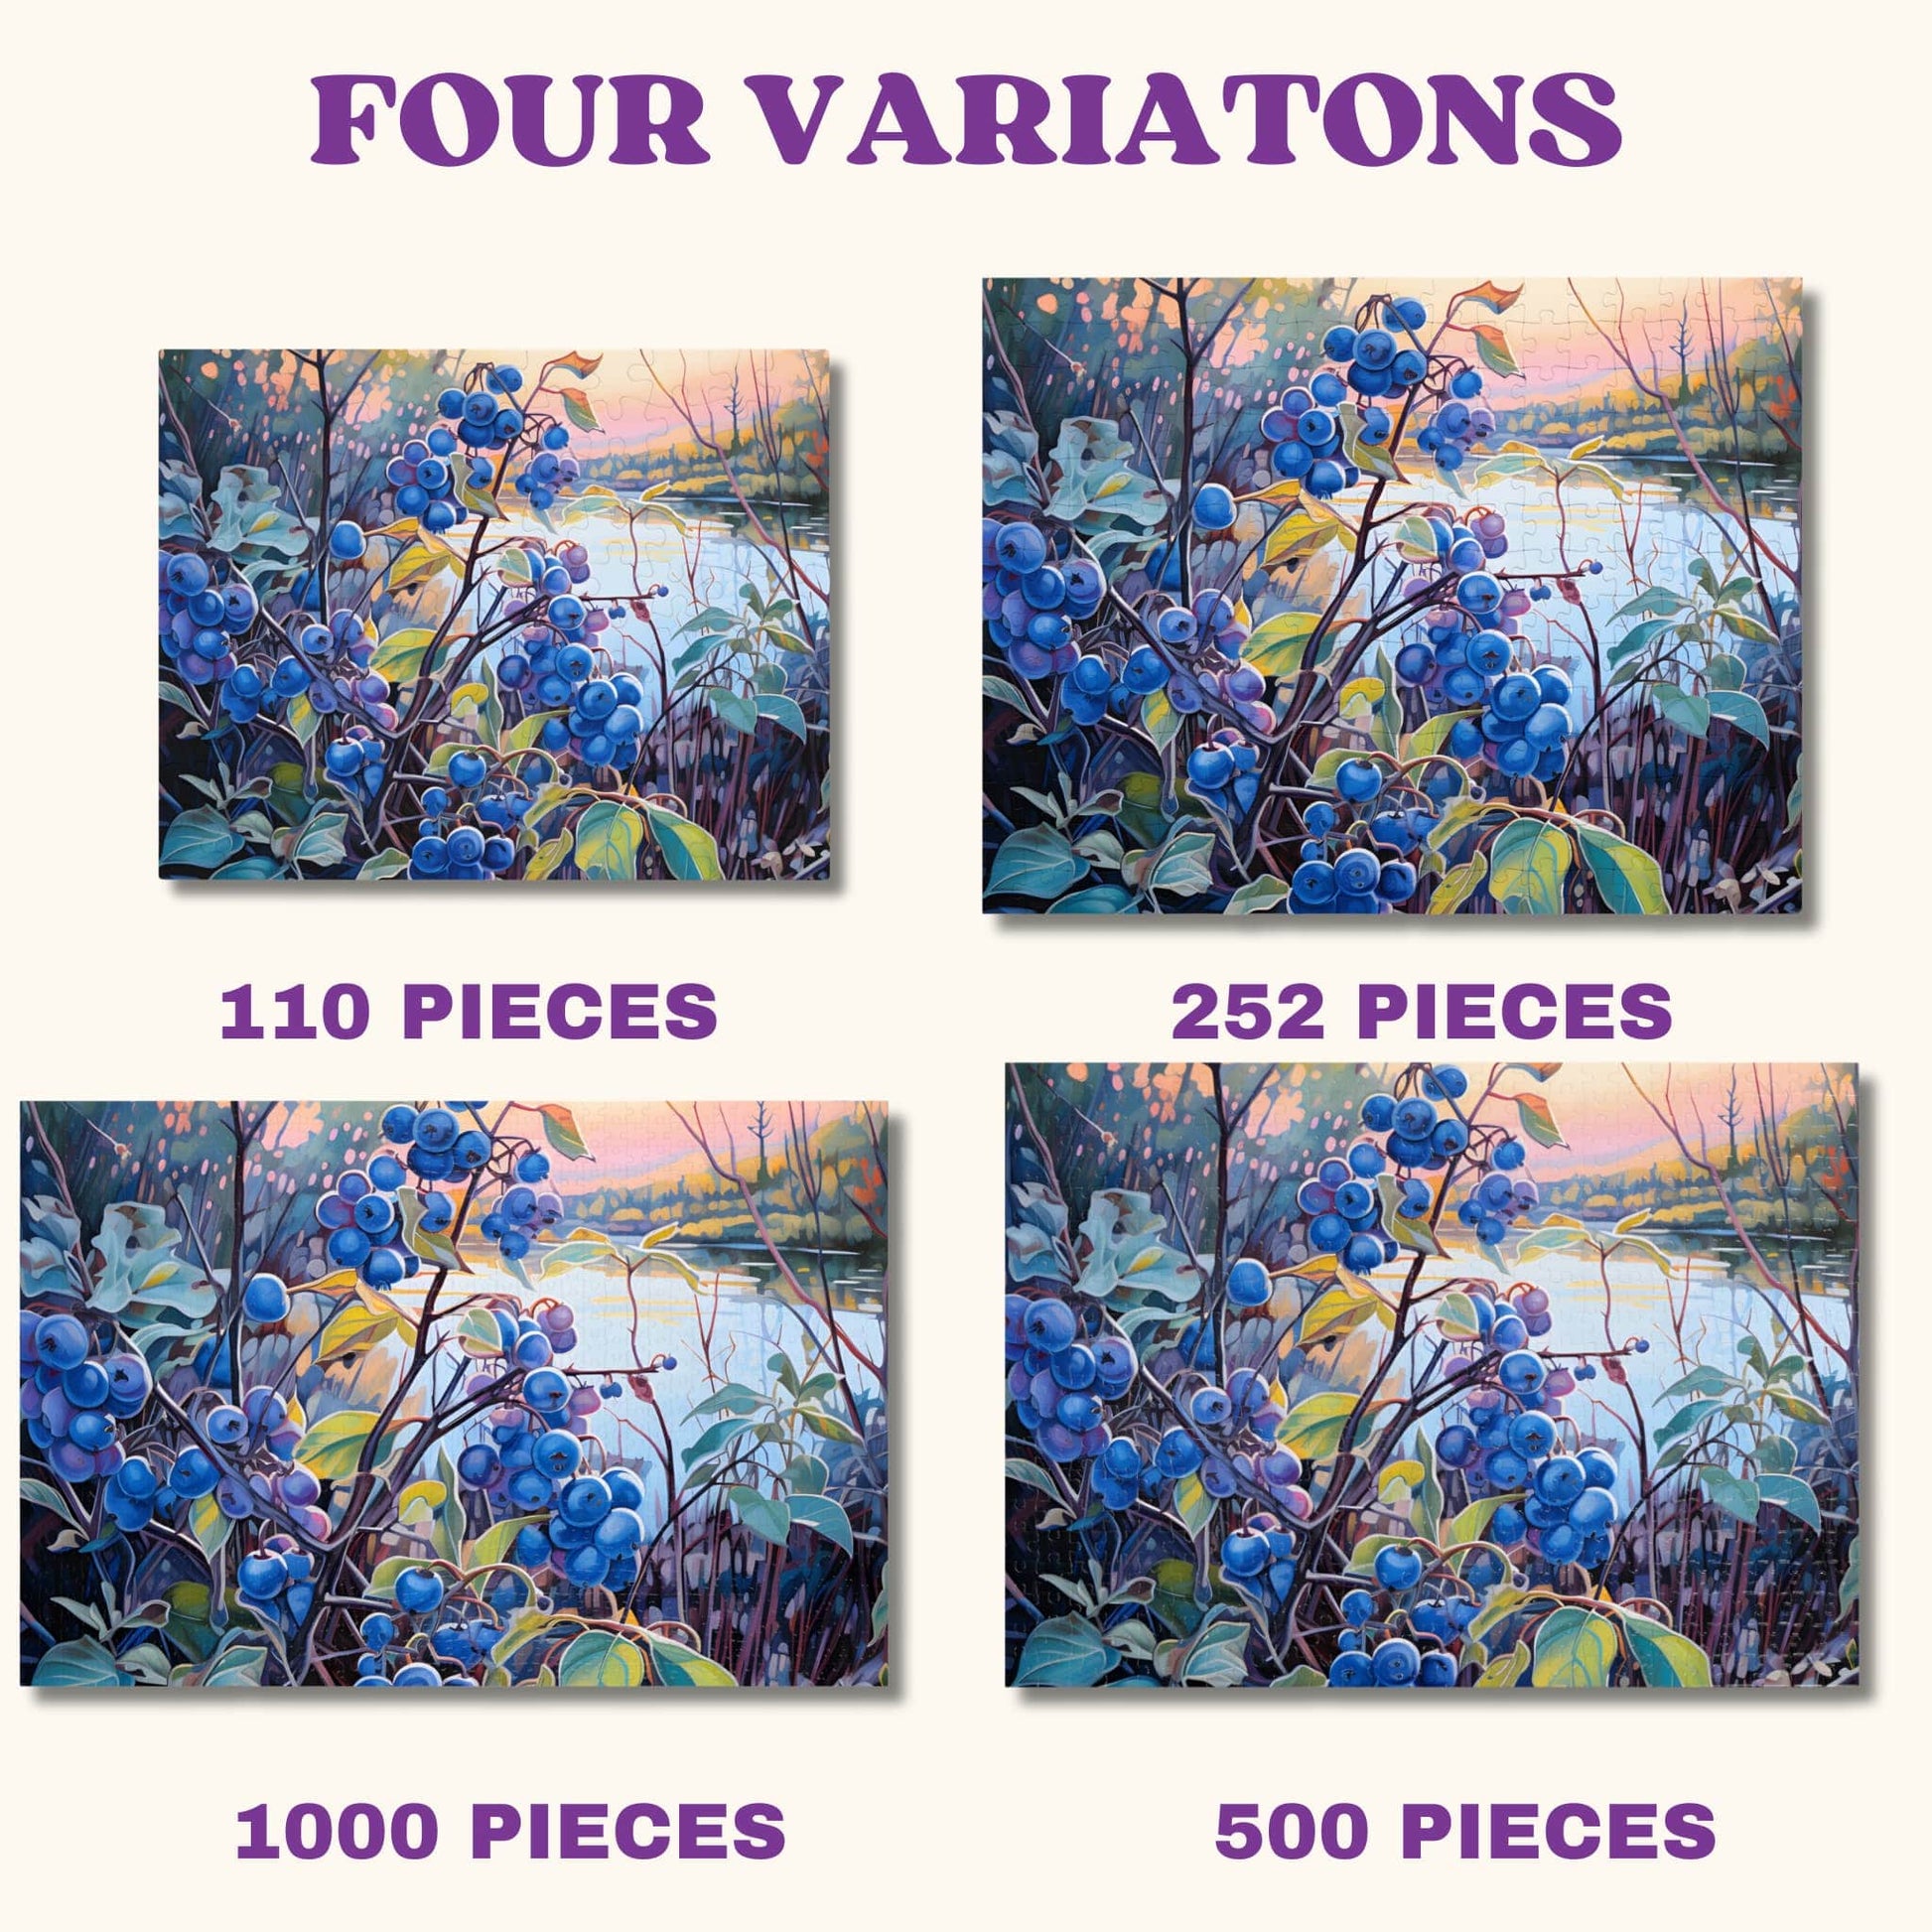 Variety of puzzle sizes including 110, 252, 500, and 1000 pieces, all featuring the Impressionist Blueberry Bush design